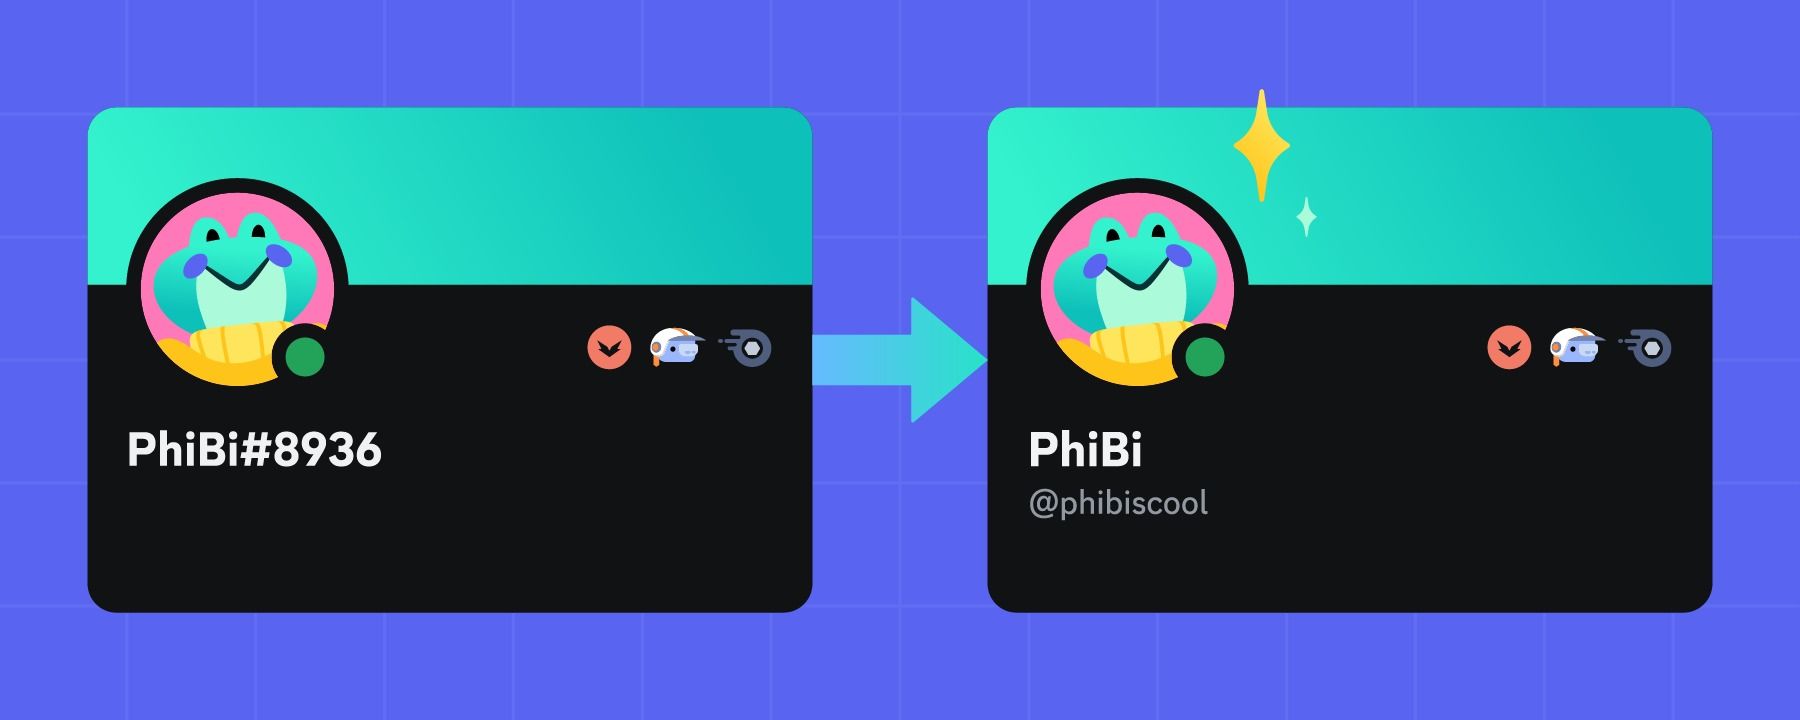 Discord-username-change-featured